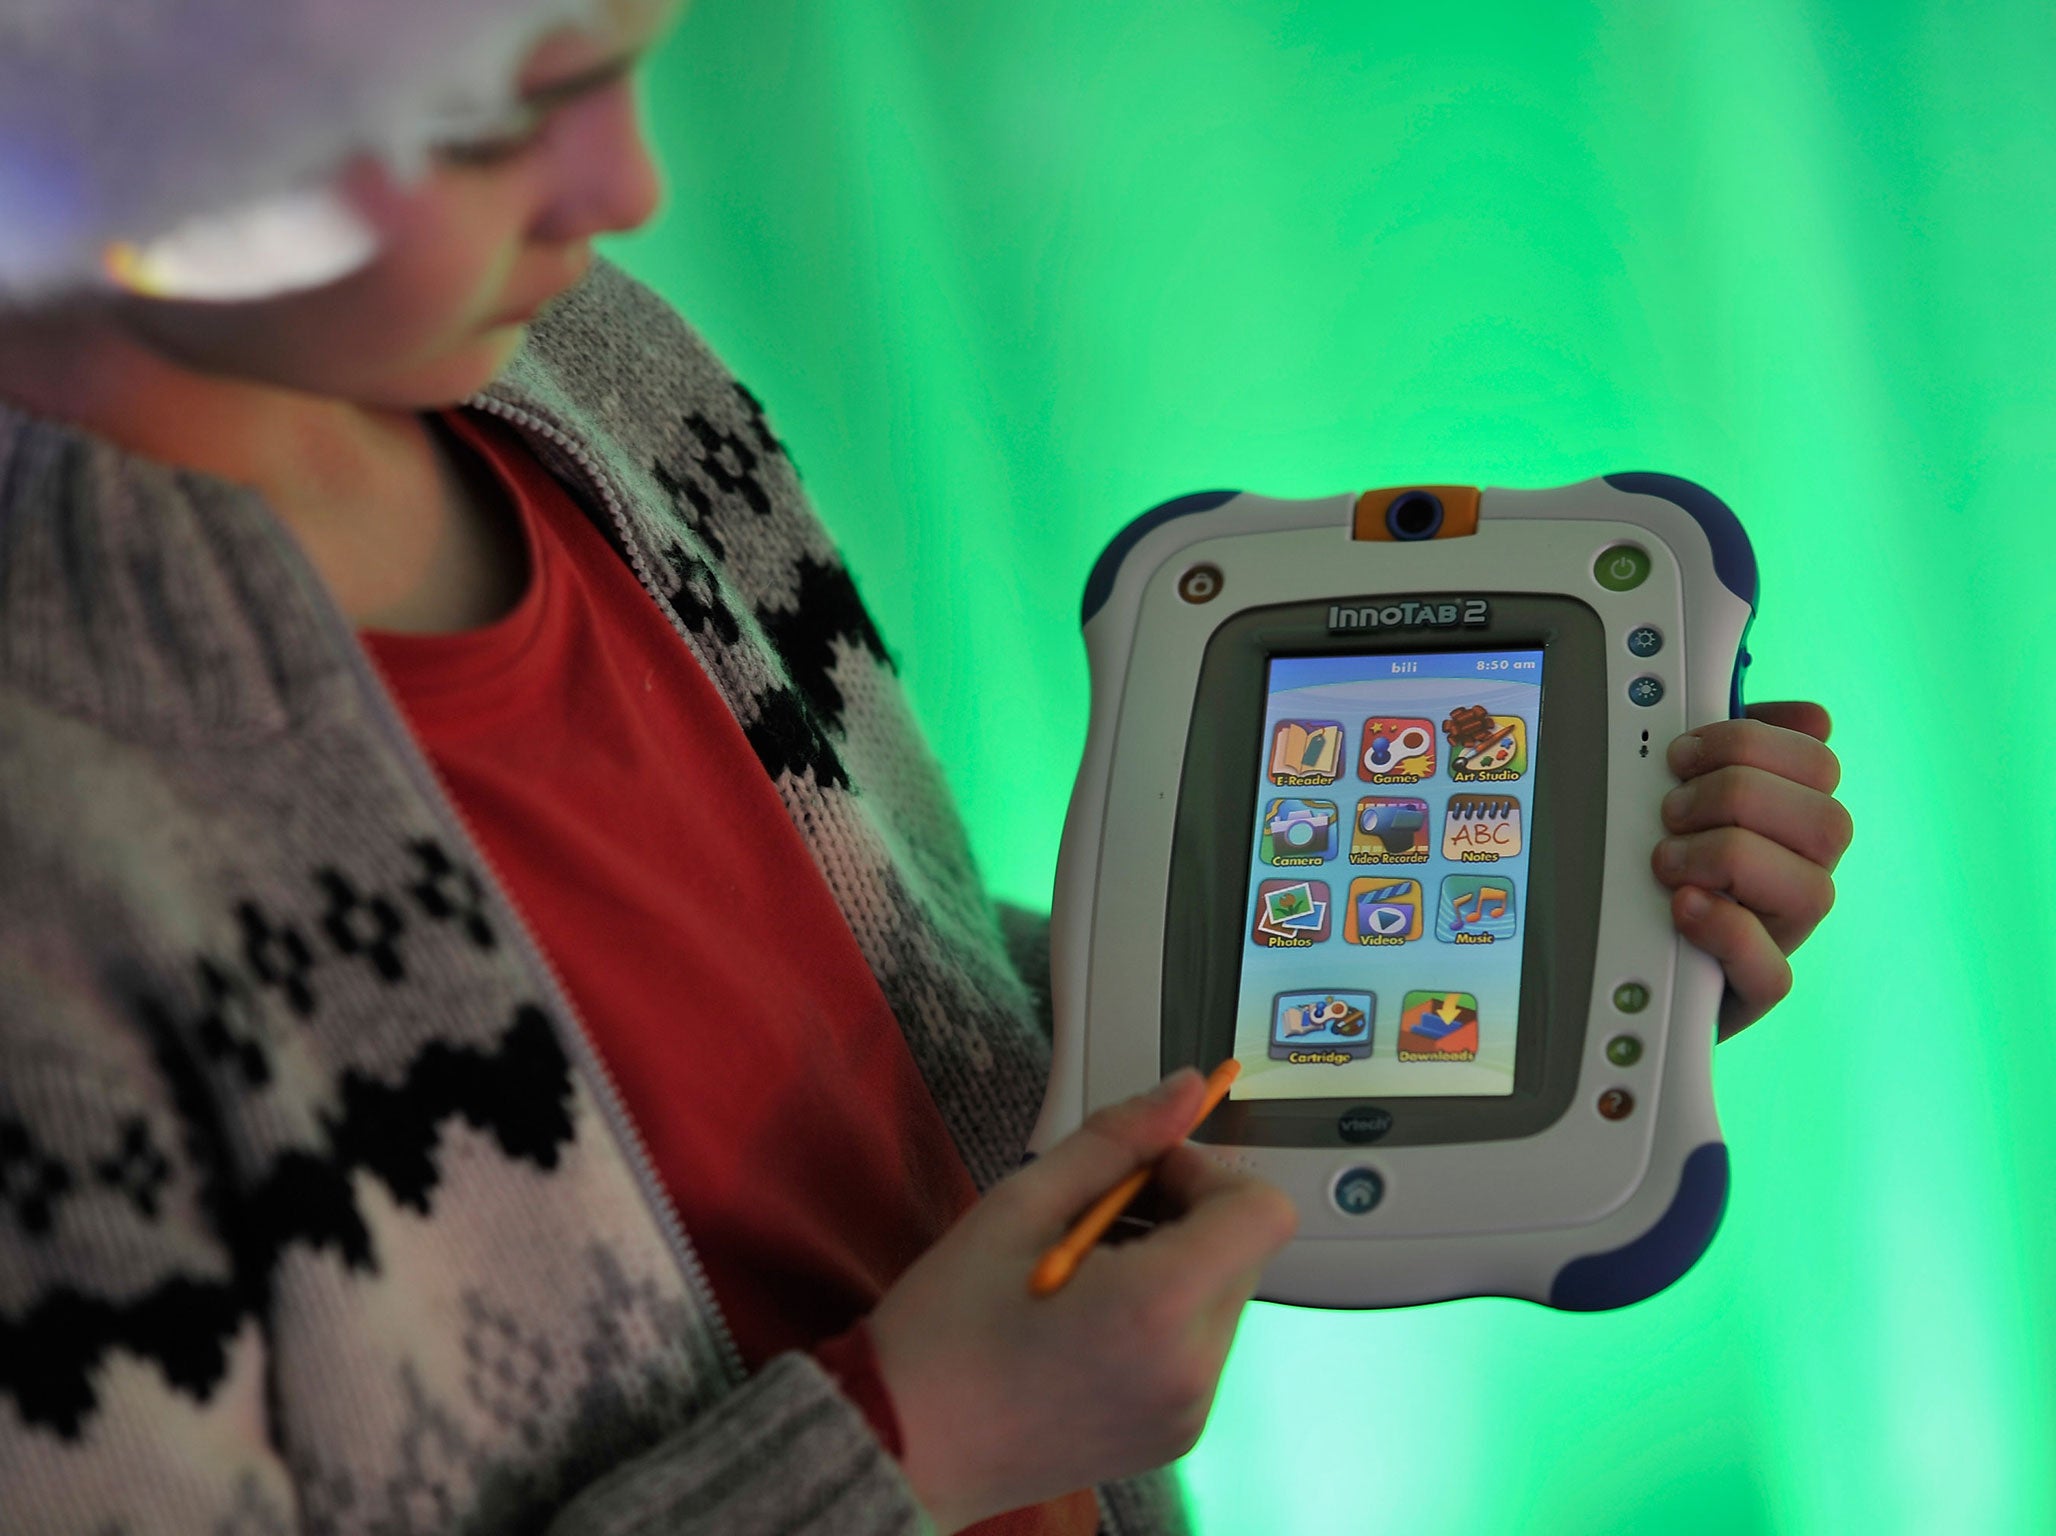 Pictures of children' 'in Vtech hack - BBC News